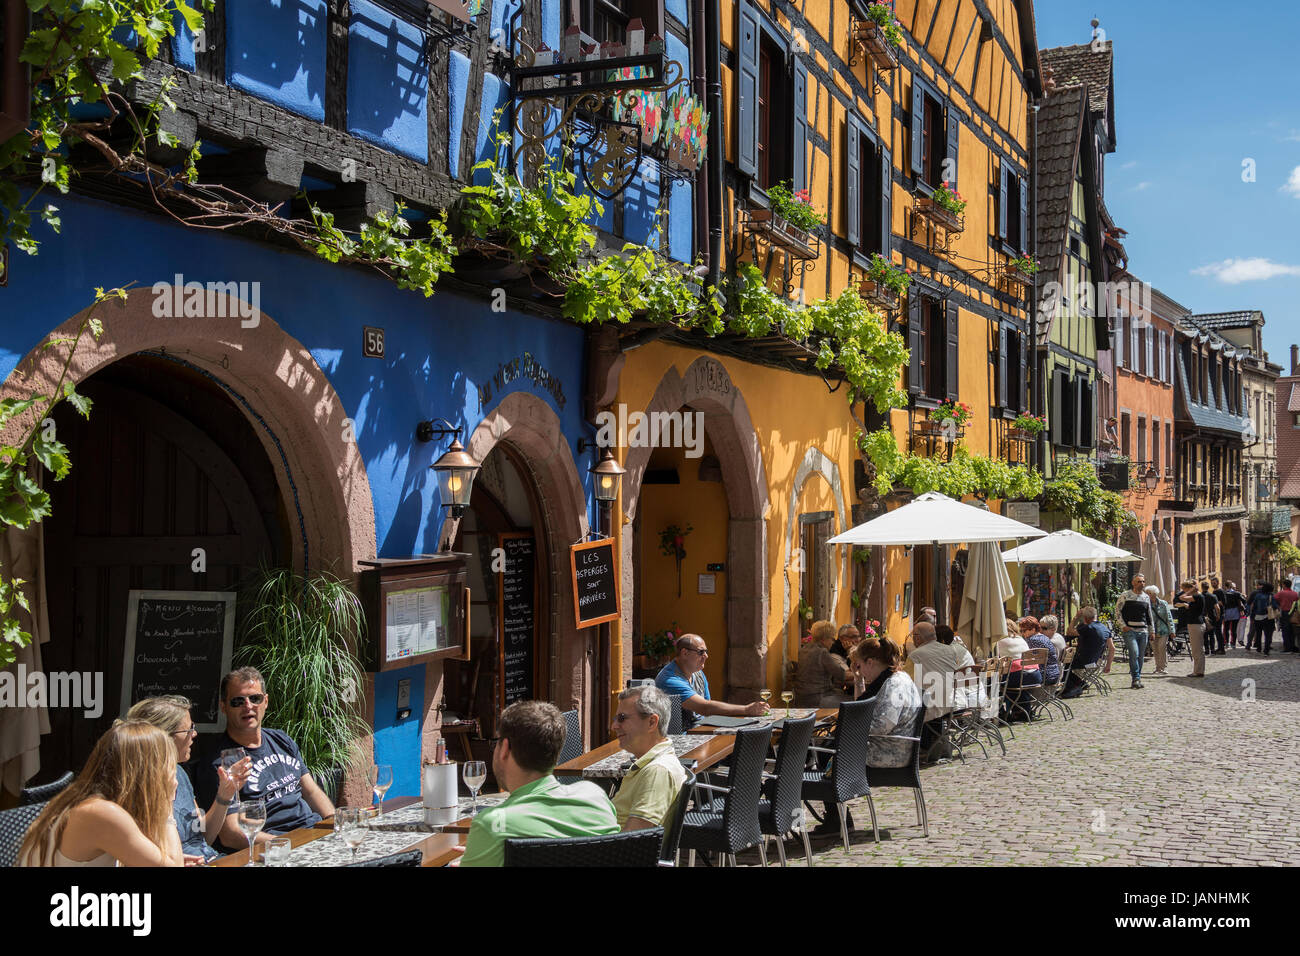 Riquewihr - Grand Est region of France. A popular tourist attraction for its historical architecture, Riquewihr looks today more or less as it did in  Stock Photo